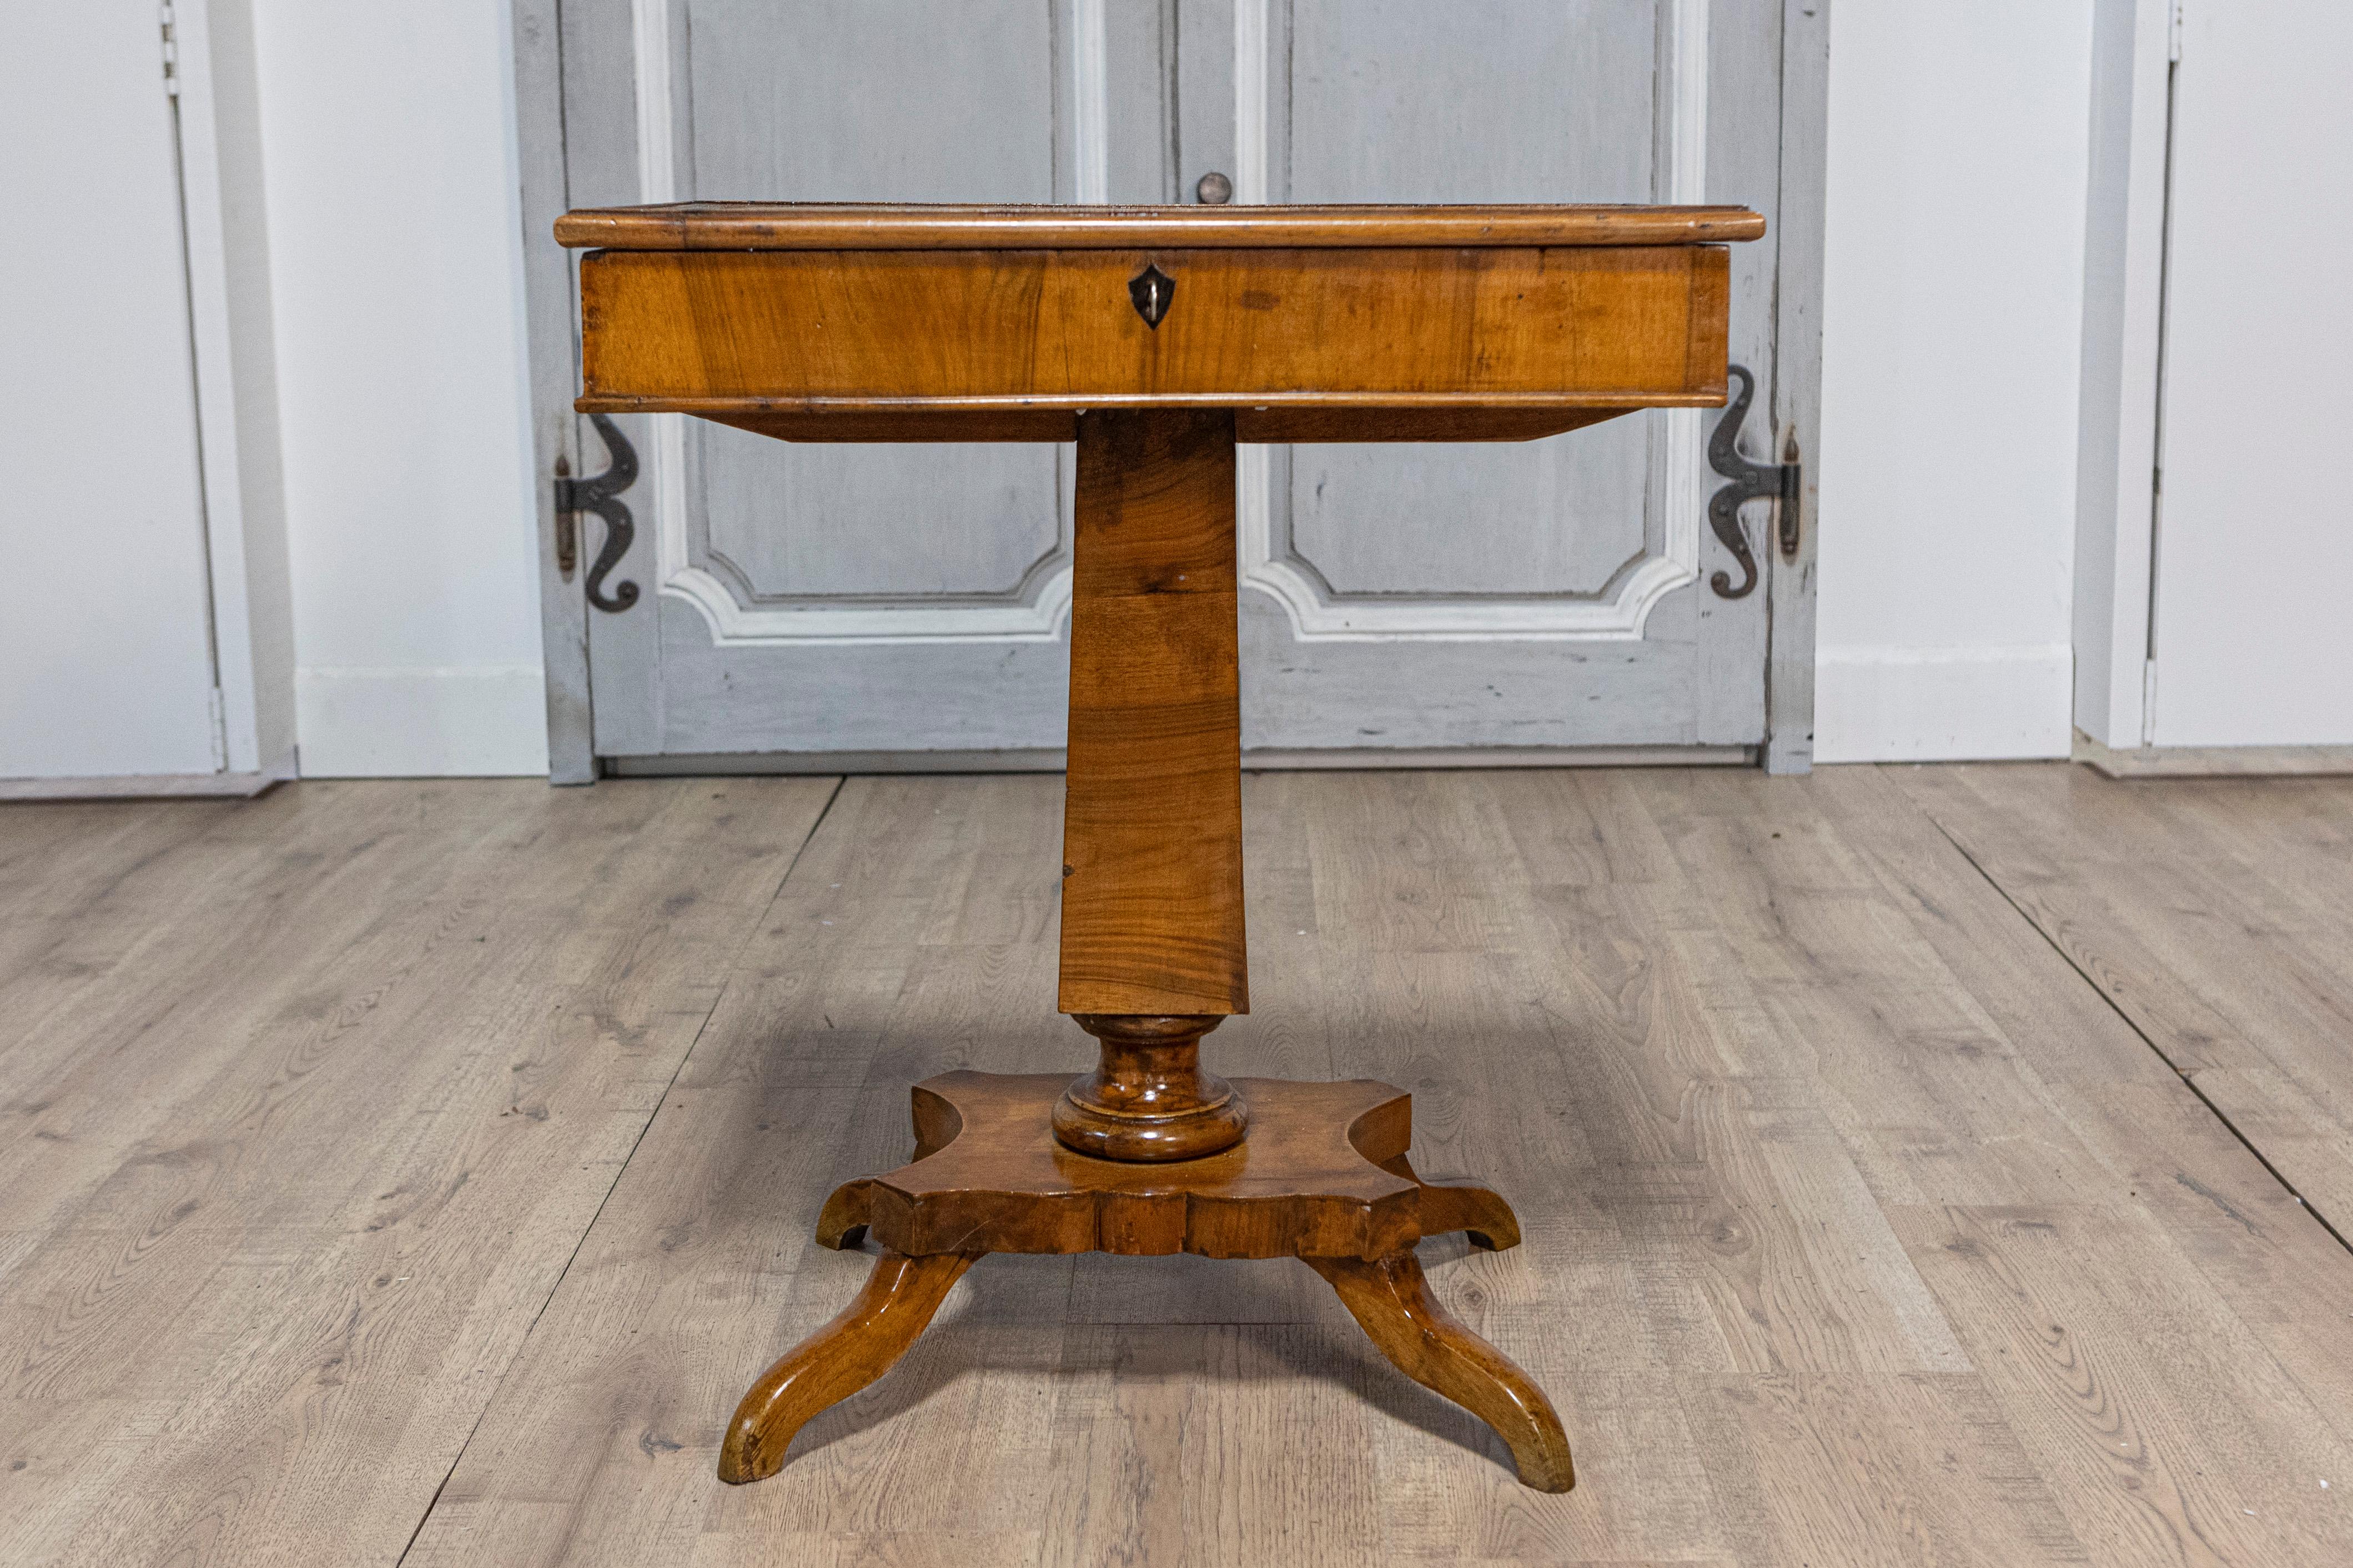 Carved Italian 19th Century Walnut Pedestal Table with Quadripod Base and Single Drawer For Sale